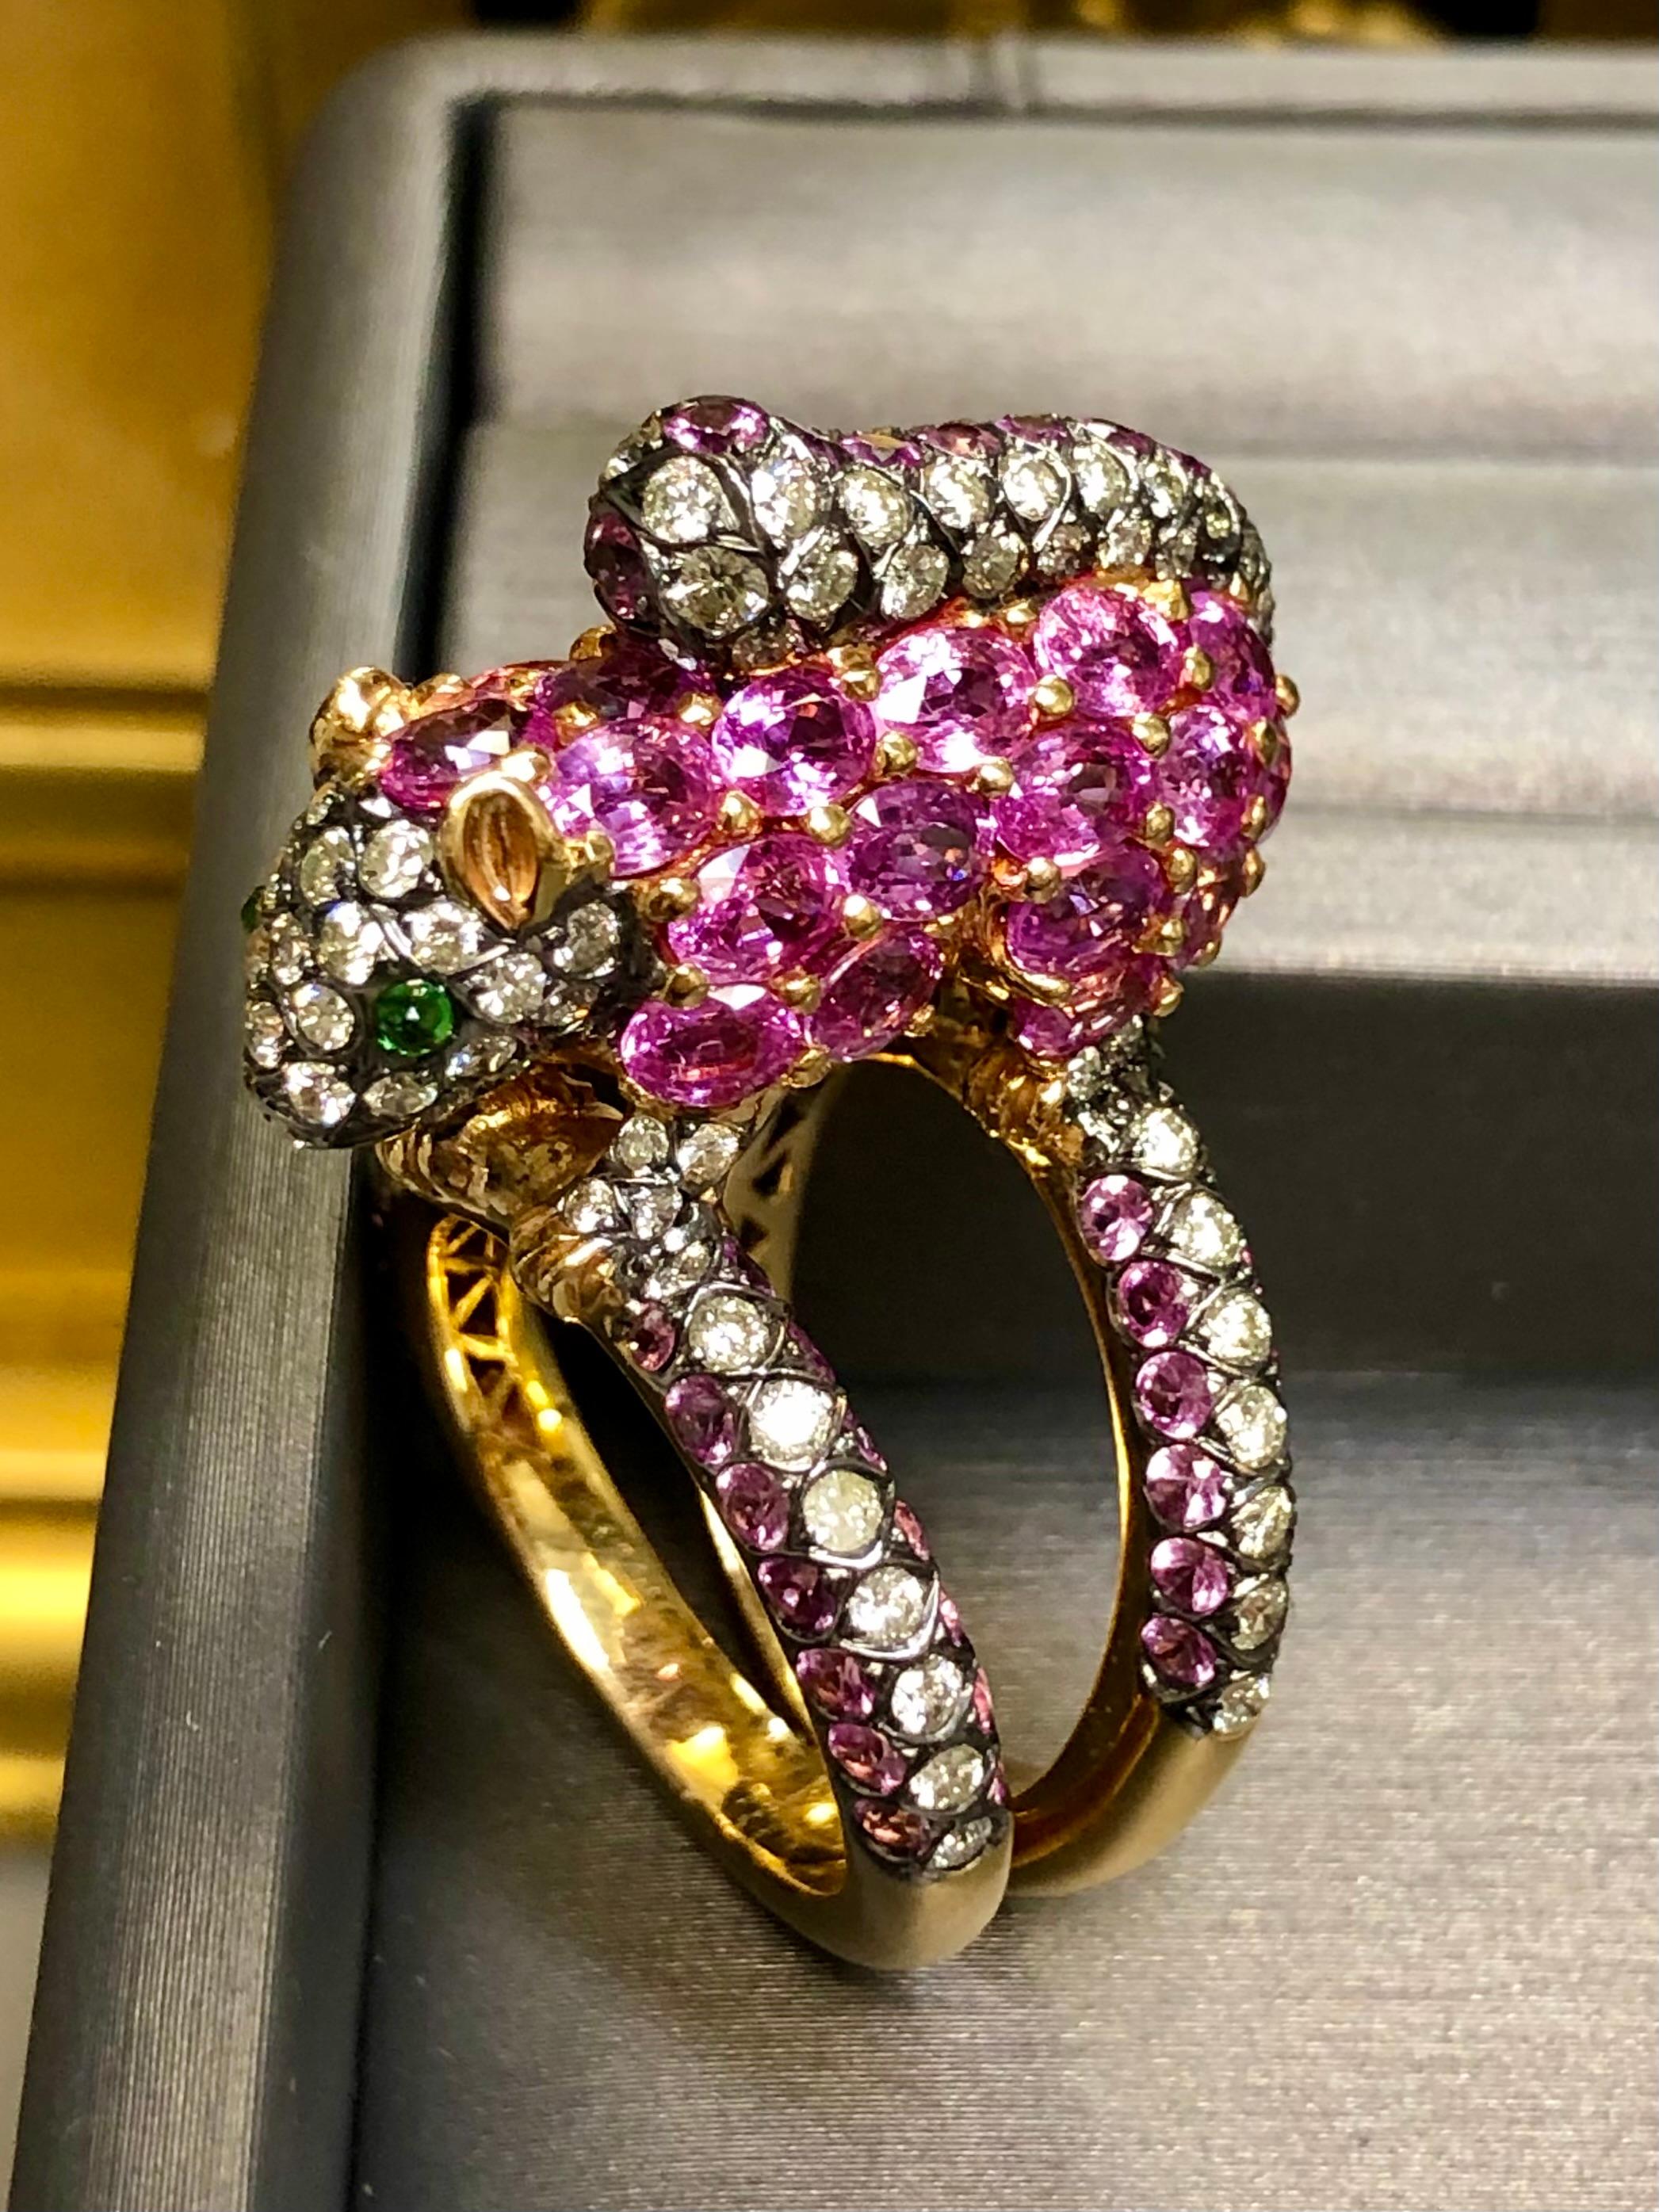 A whimsical cocktail ring by designer “ZORAB”. It has been done in 18K yellow gold and set with approximately 2.12cttw in J-K Si1-2 diamonds as well as approximately 6.90cttw in natural, vibrant pink sapphires. This little furry woodland creature